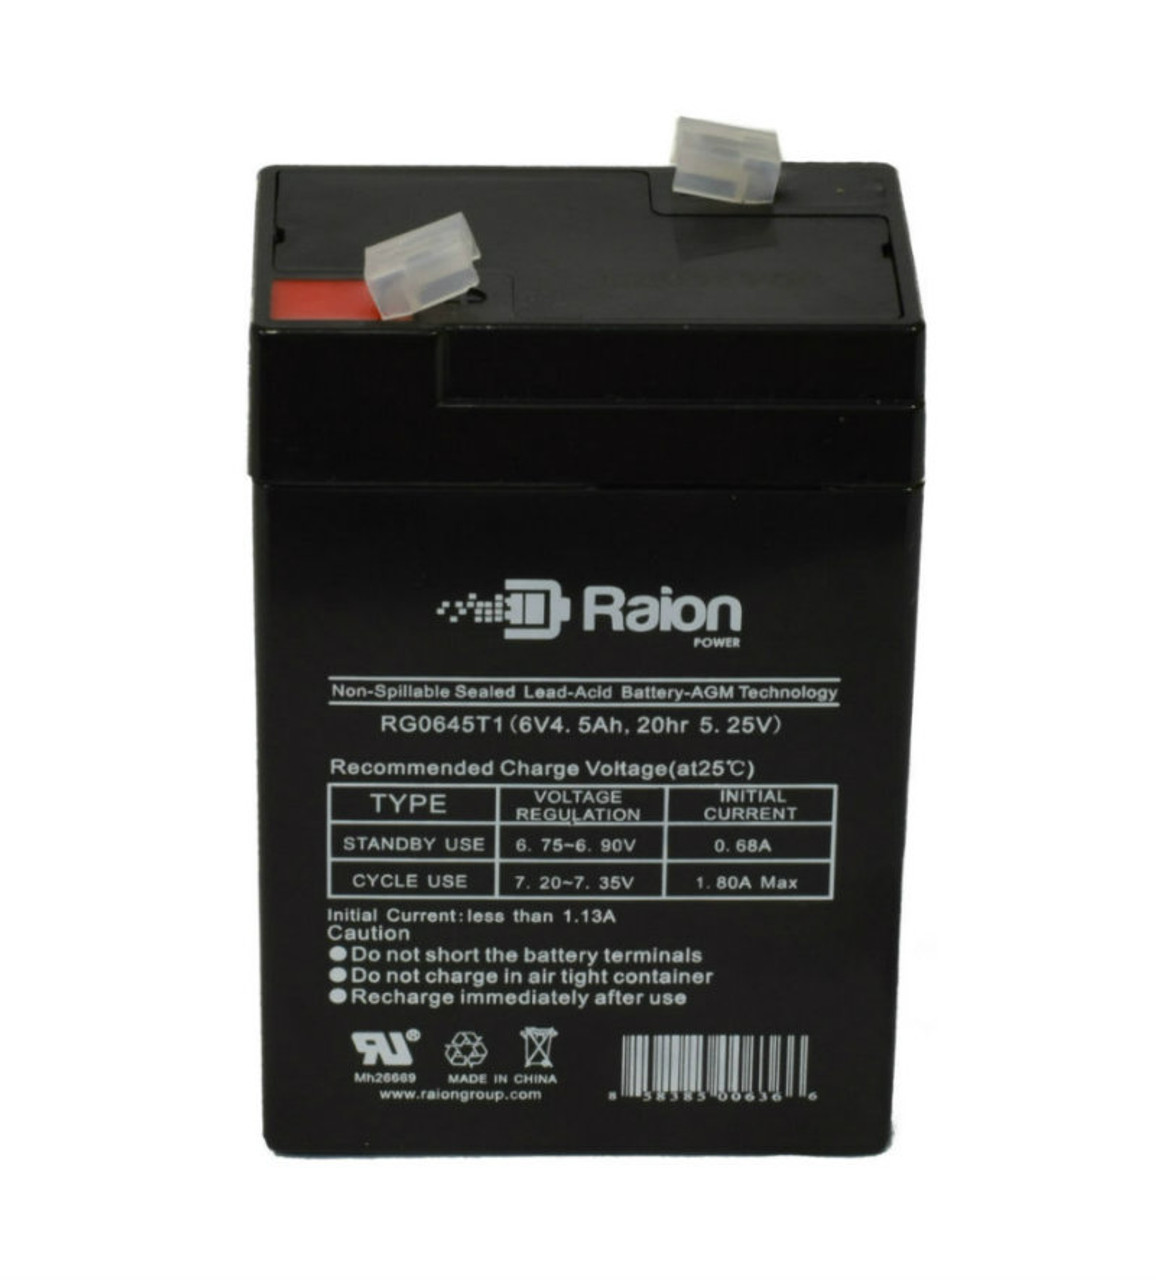 Raion Power RG0645T1 Replacement Battery Cartridge for NEATA NTH6-4.5